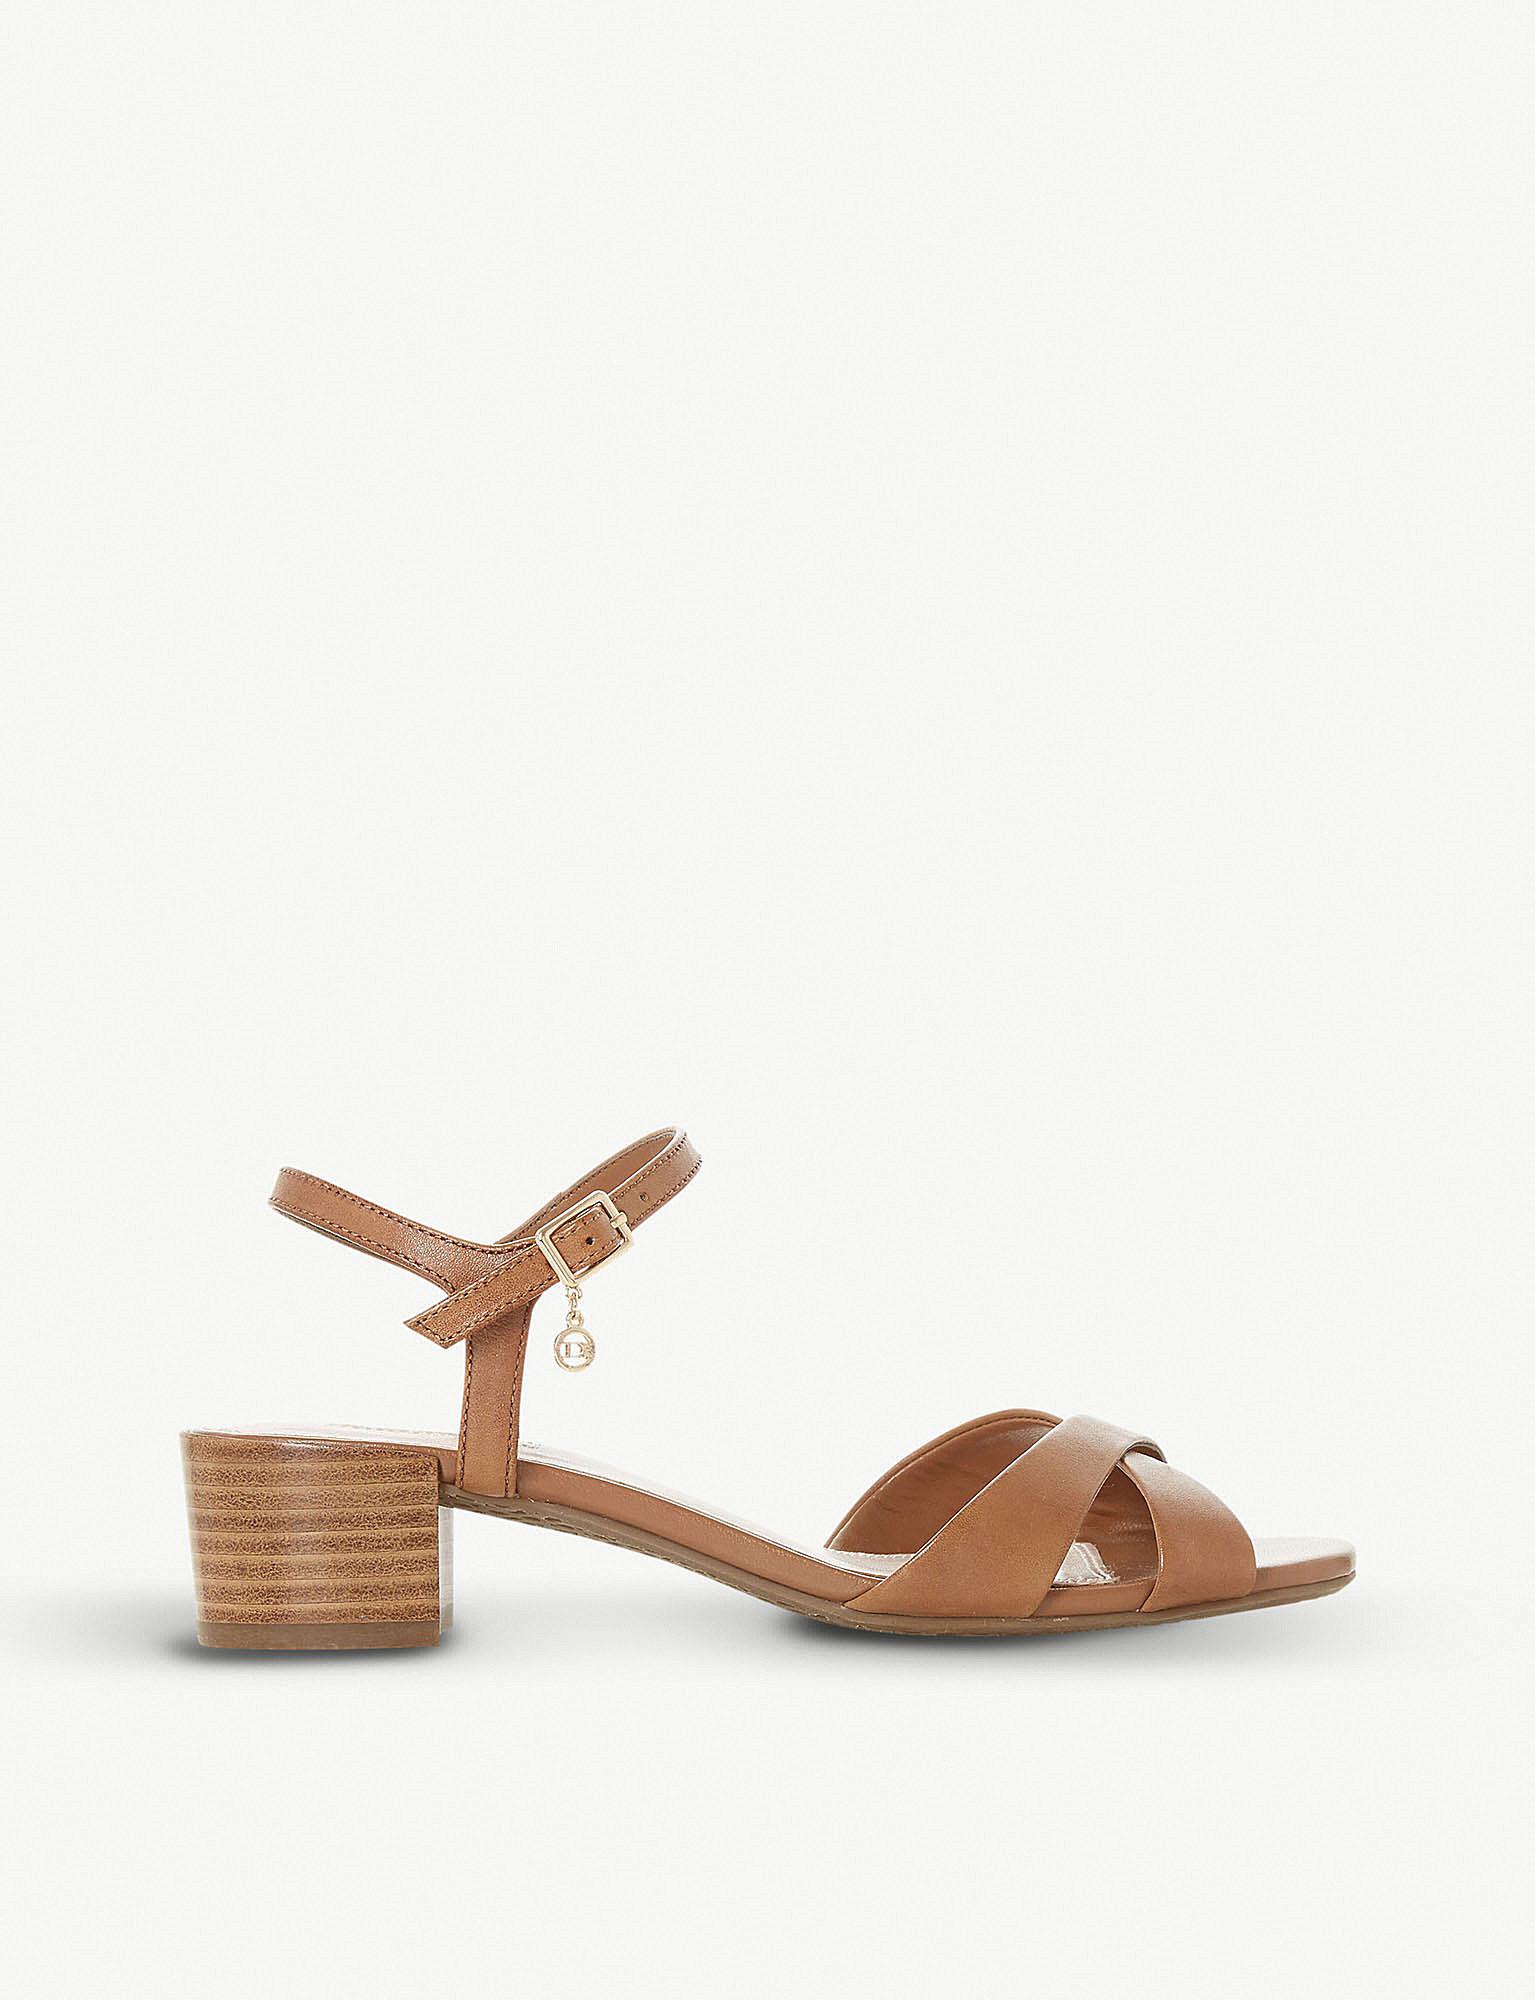 Dune Jazzy Block-heeled Leather Sandals in Tan-Leather (Brown) - Lyst